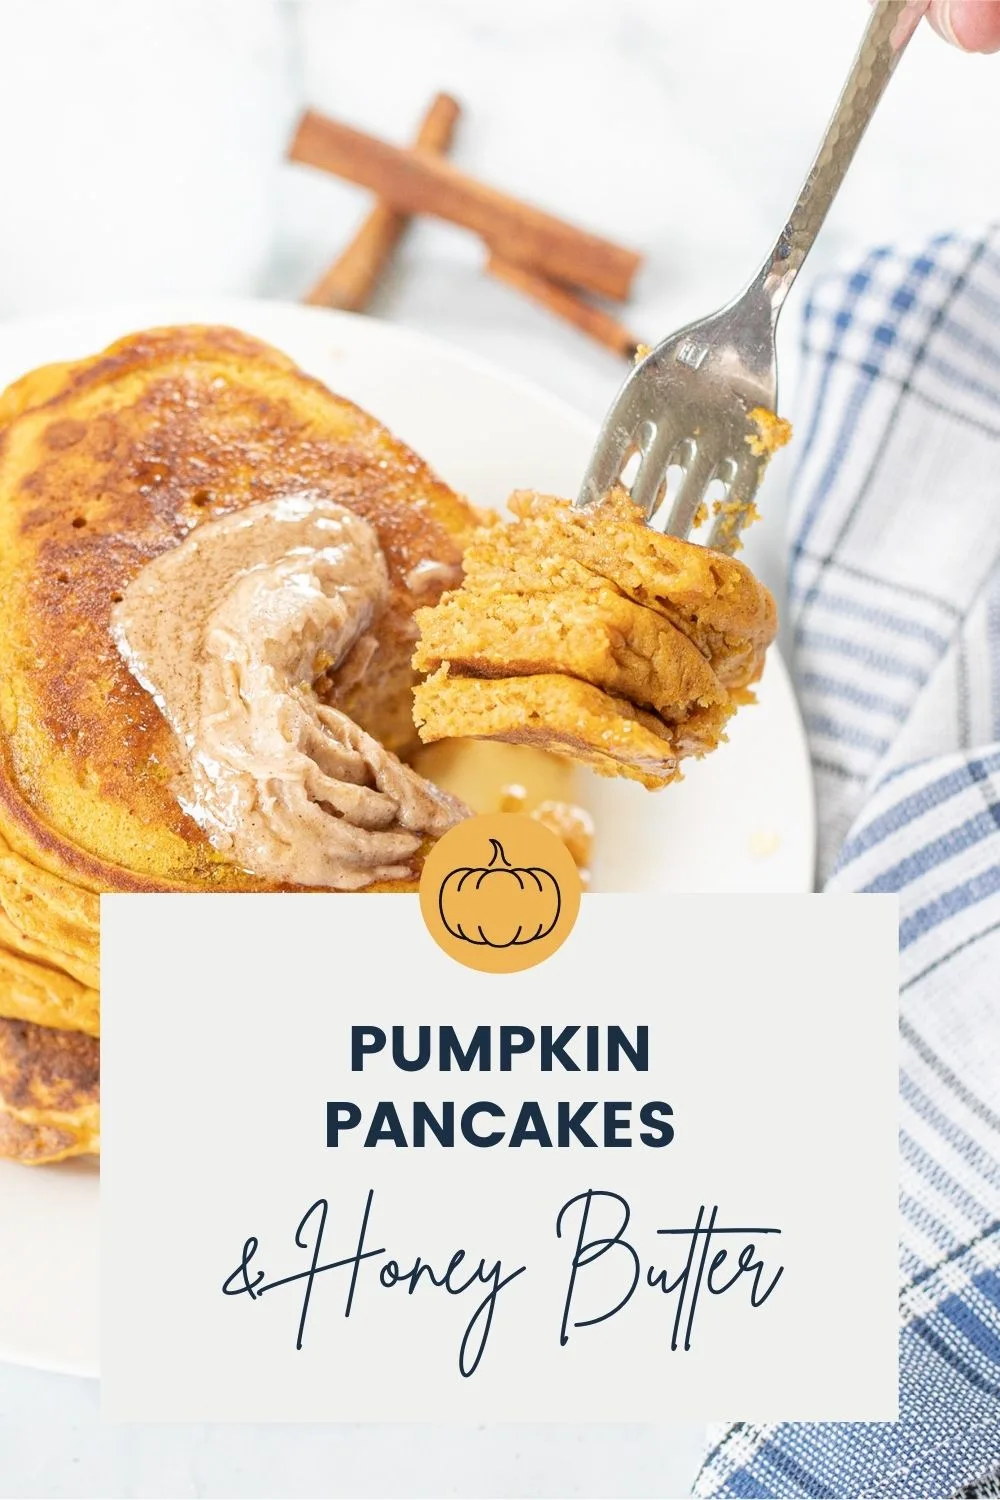 Forkfull of pancakes over a plate of pumpkin pancakes.